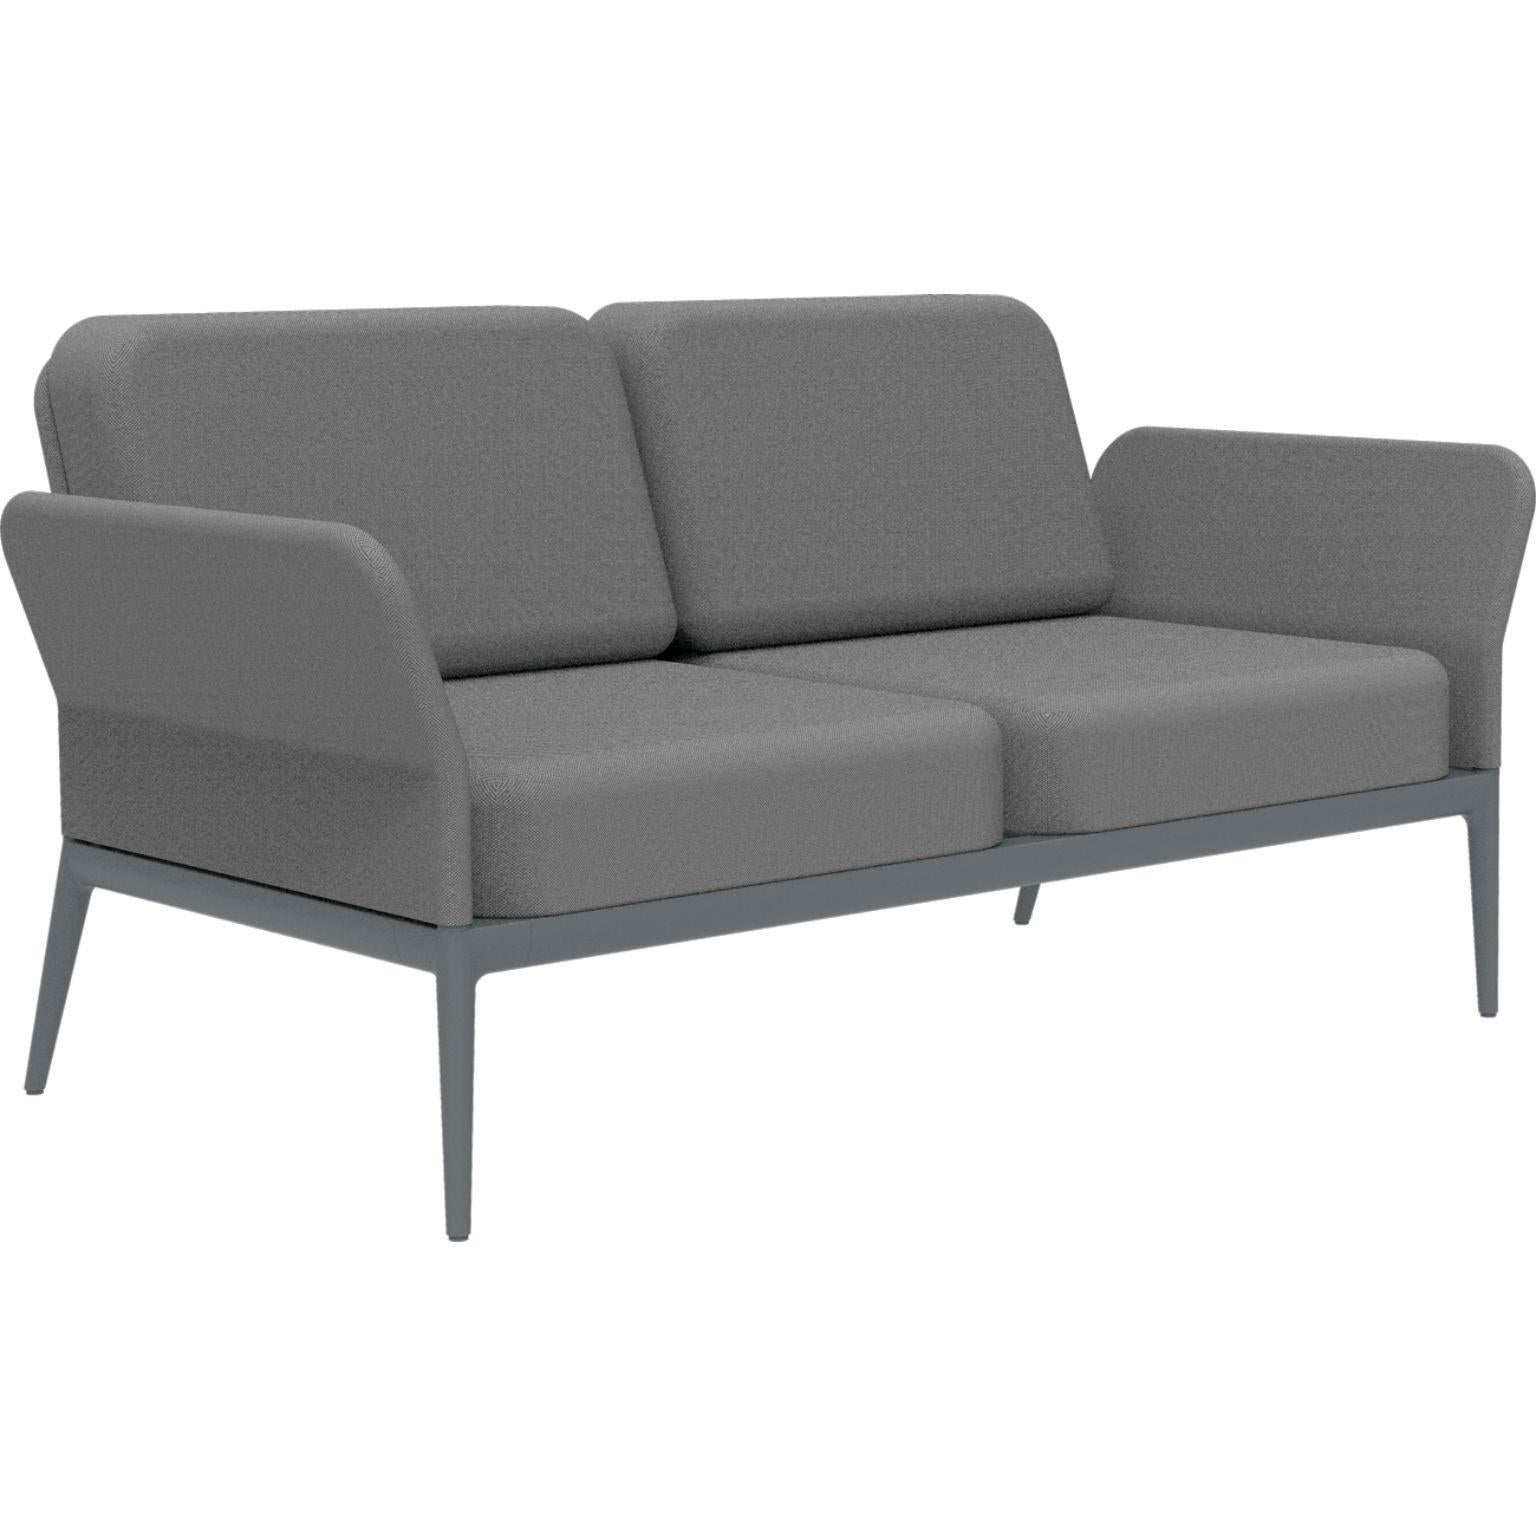 Cover grey sofa by MOWEE
Dimensions: D83 x W160 x H81 cm (seat height 42 cm).
Material: Aluminum and upholstery.
Weight: 32 kg.
Also available in different colors and finishes.

An unmistakable collection for its beauty and robustness. A